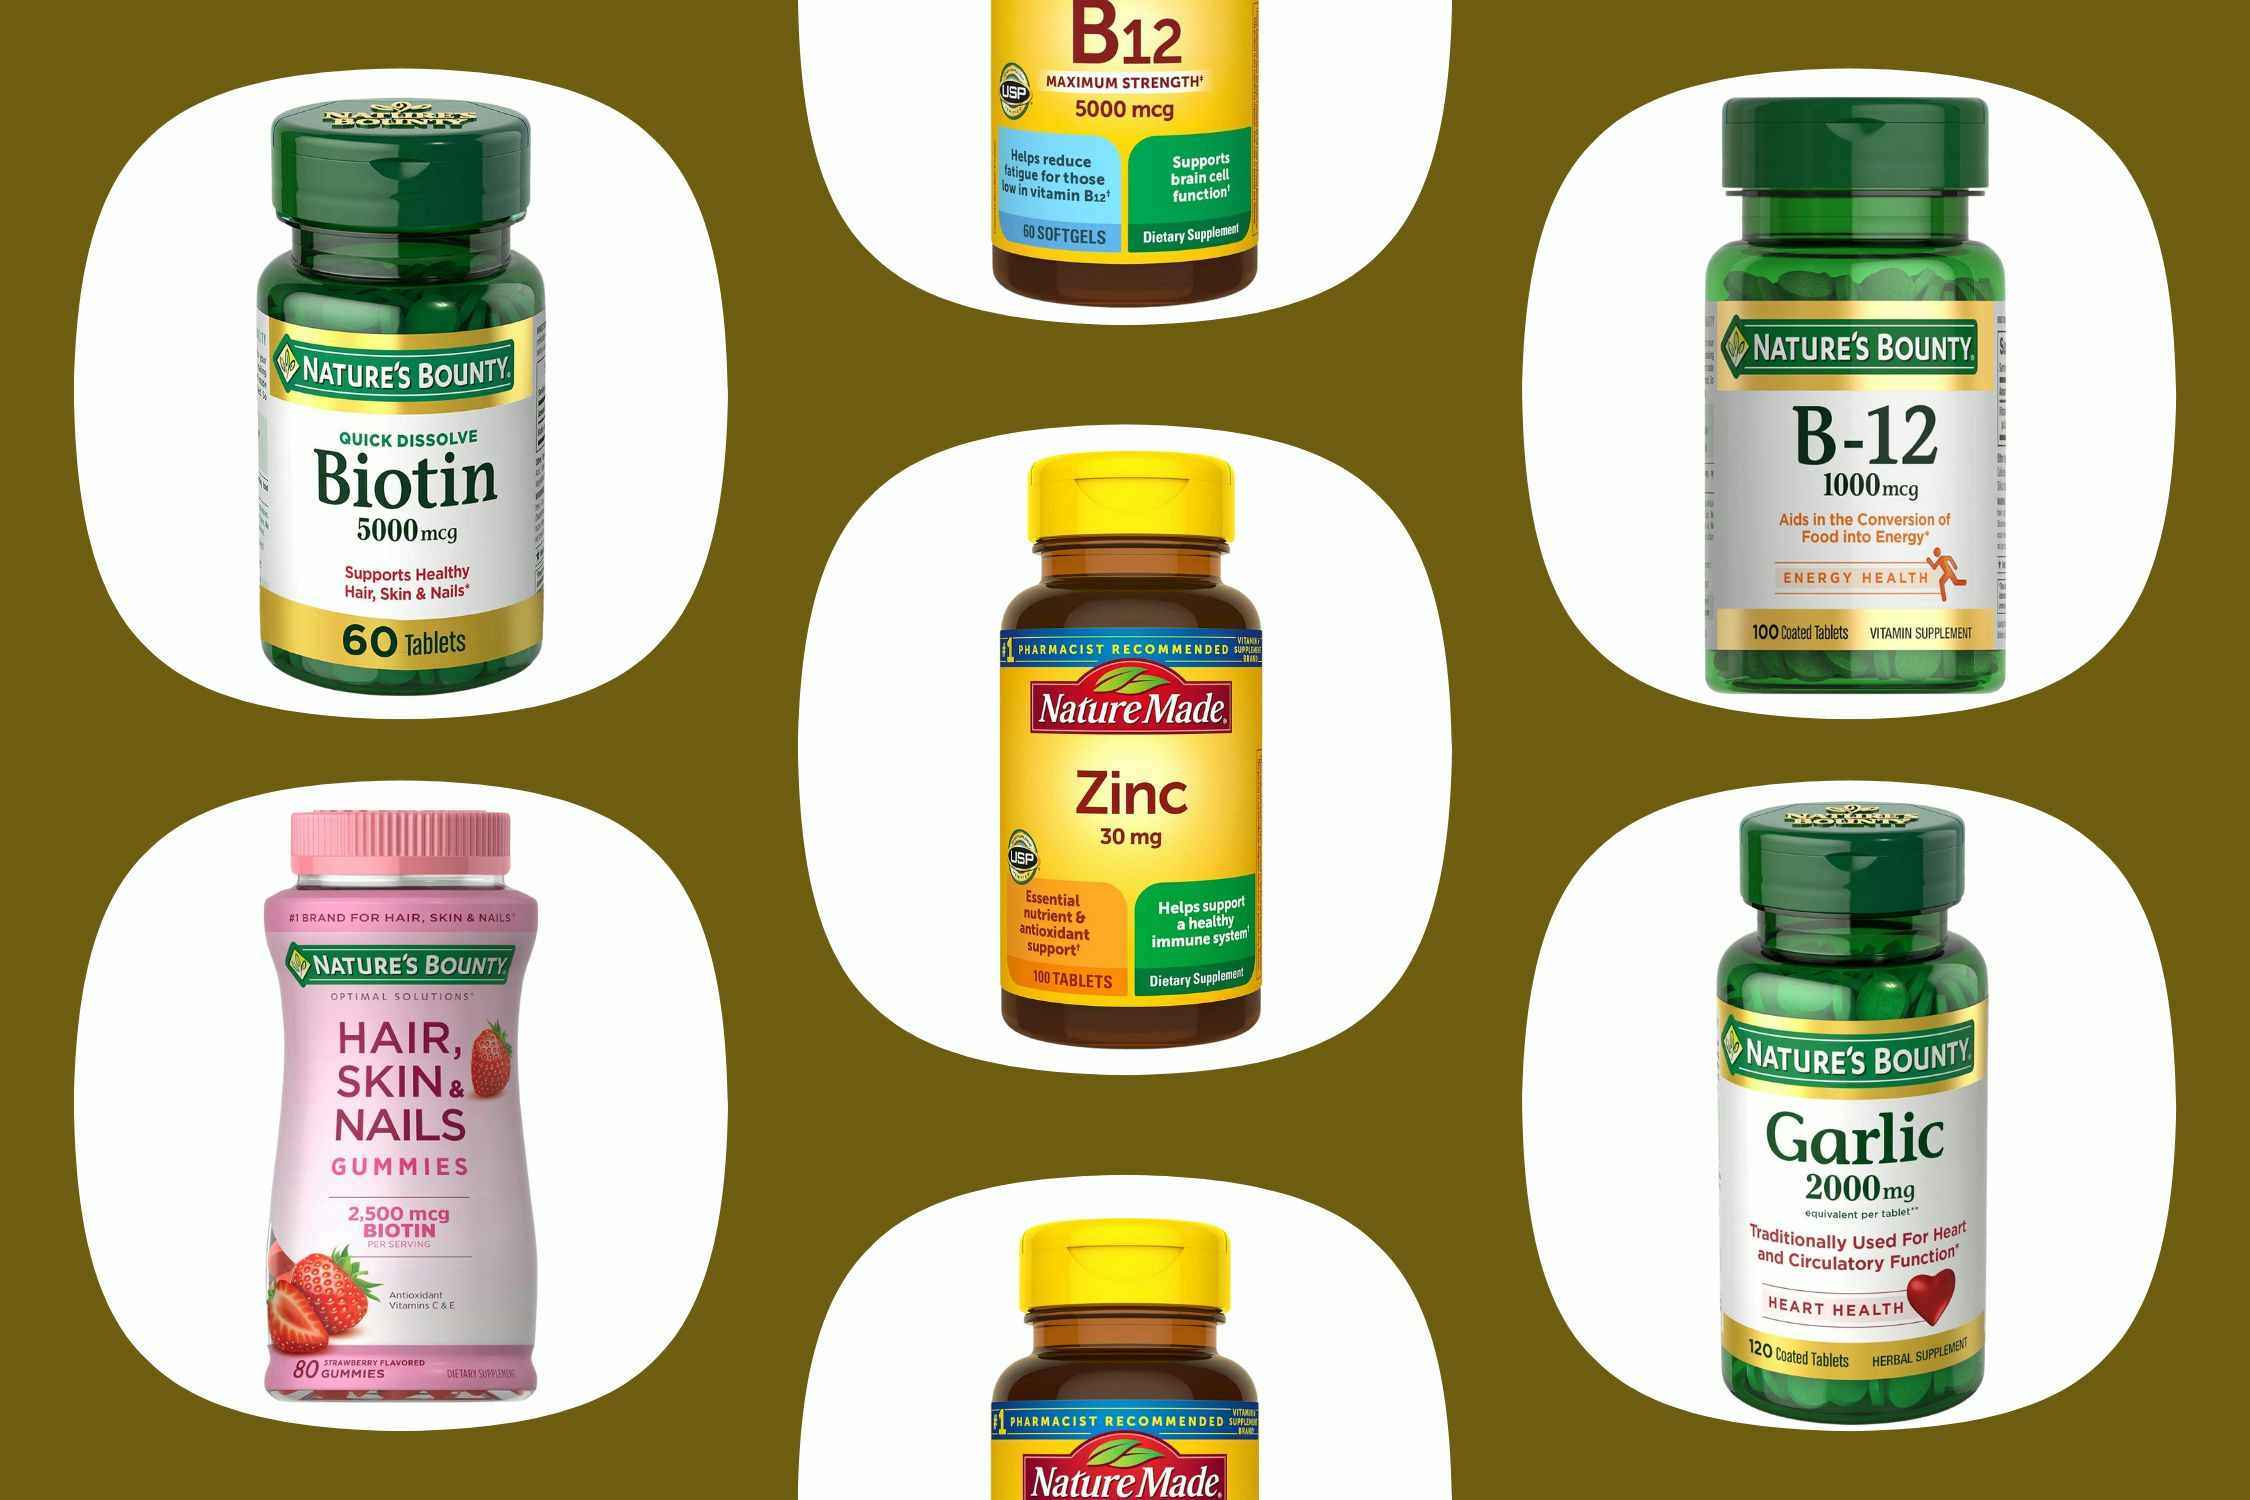 Nature Made Zinc for $1.25 and $2.04 Nature's Bounty B12 Vitamins on Amazon